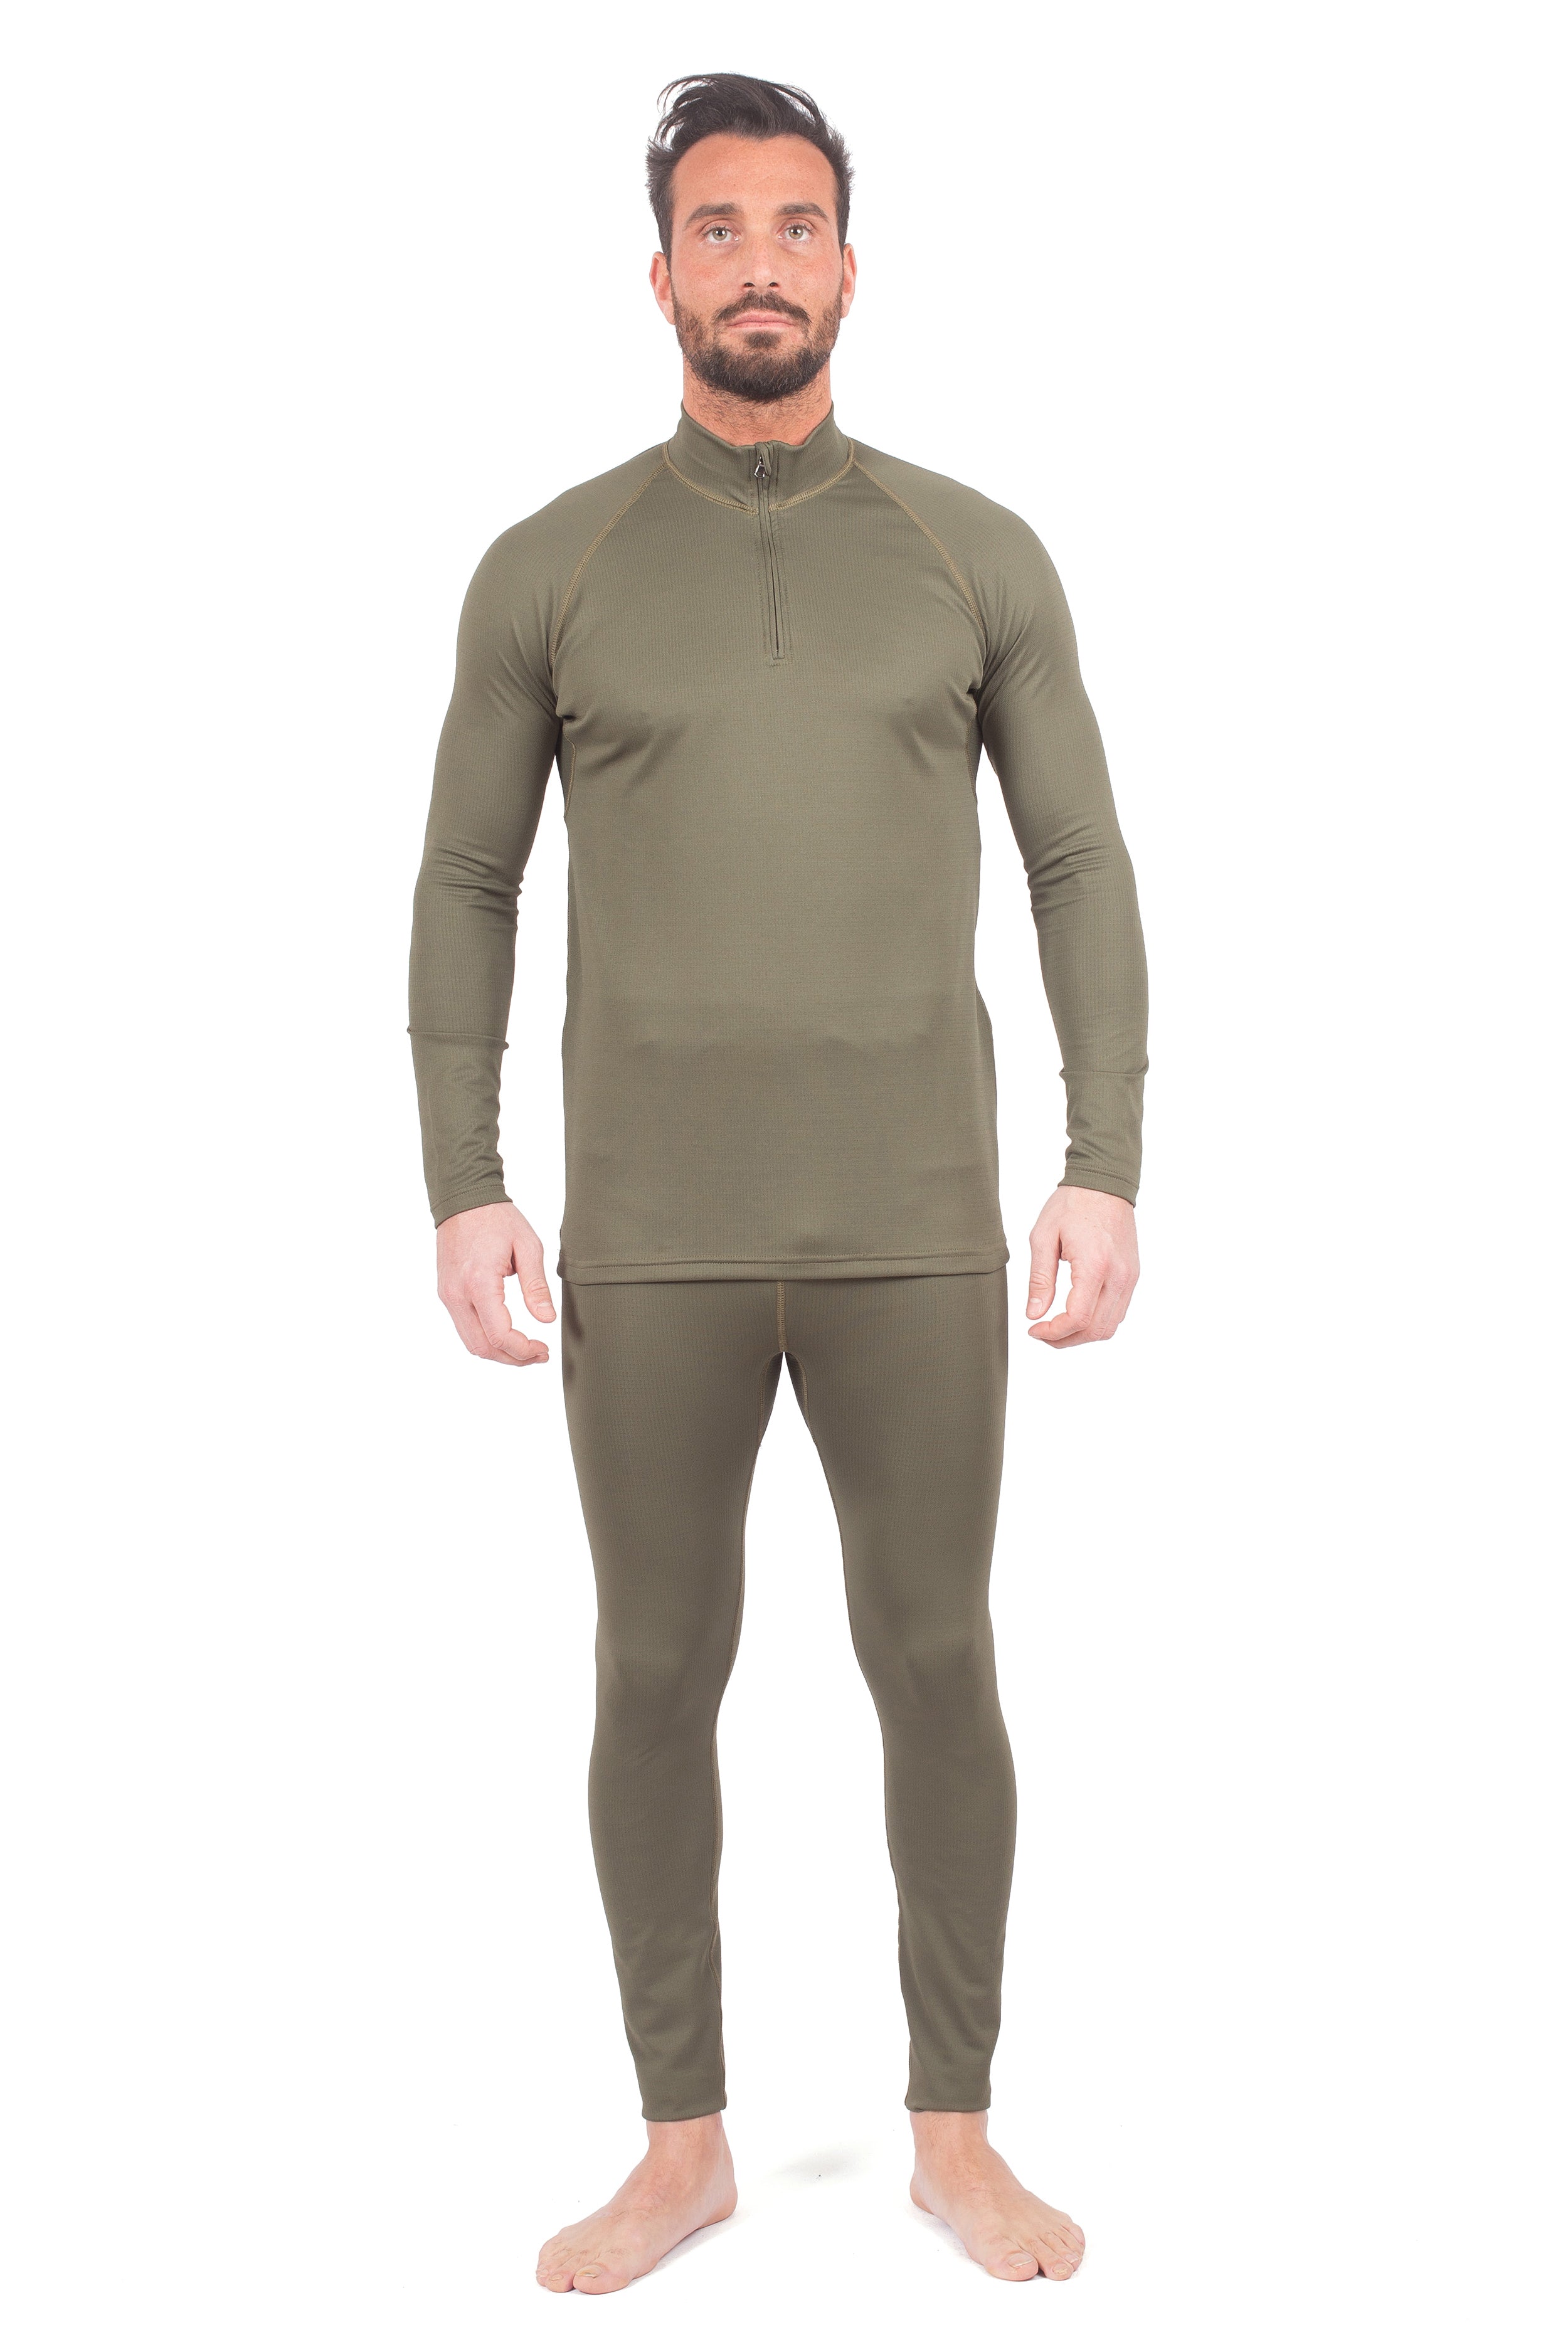 ARMY FULL THERMAL COMBAT SUIT